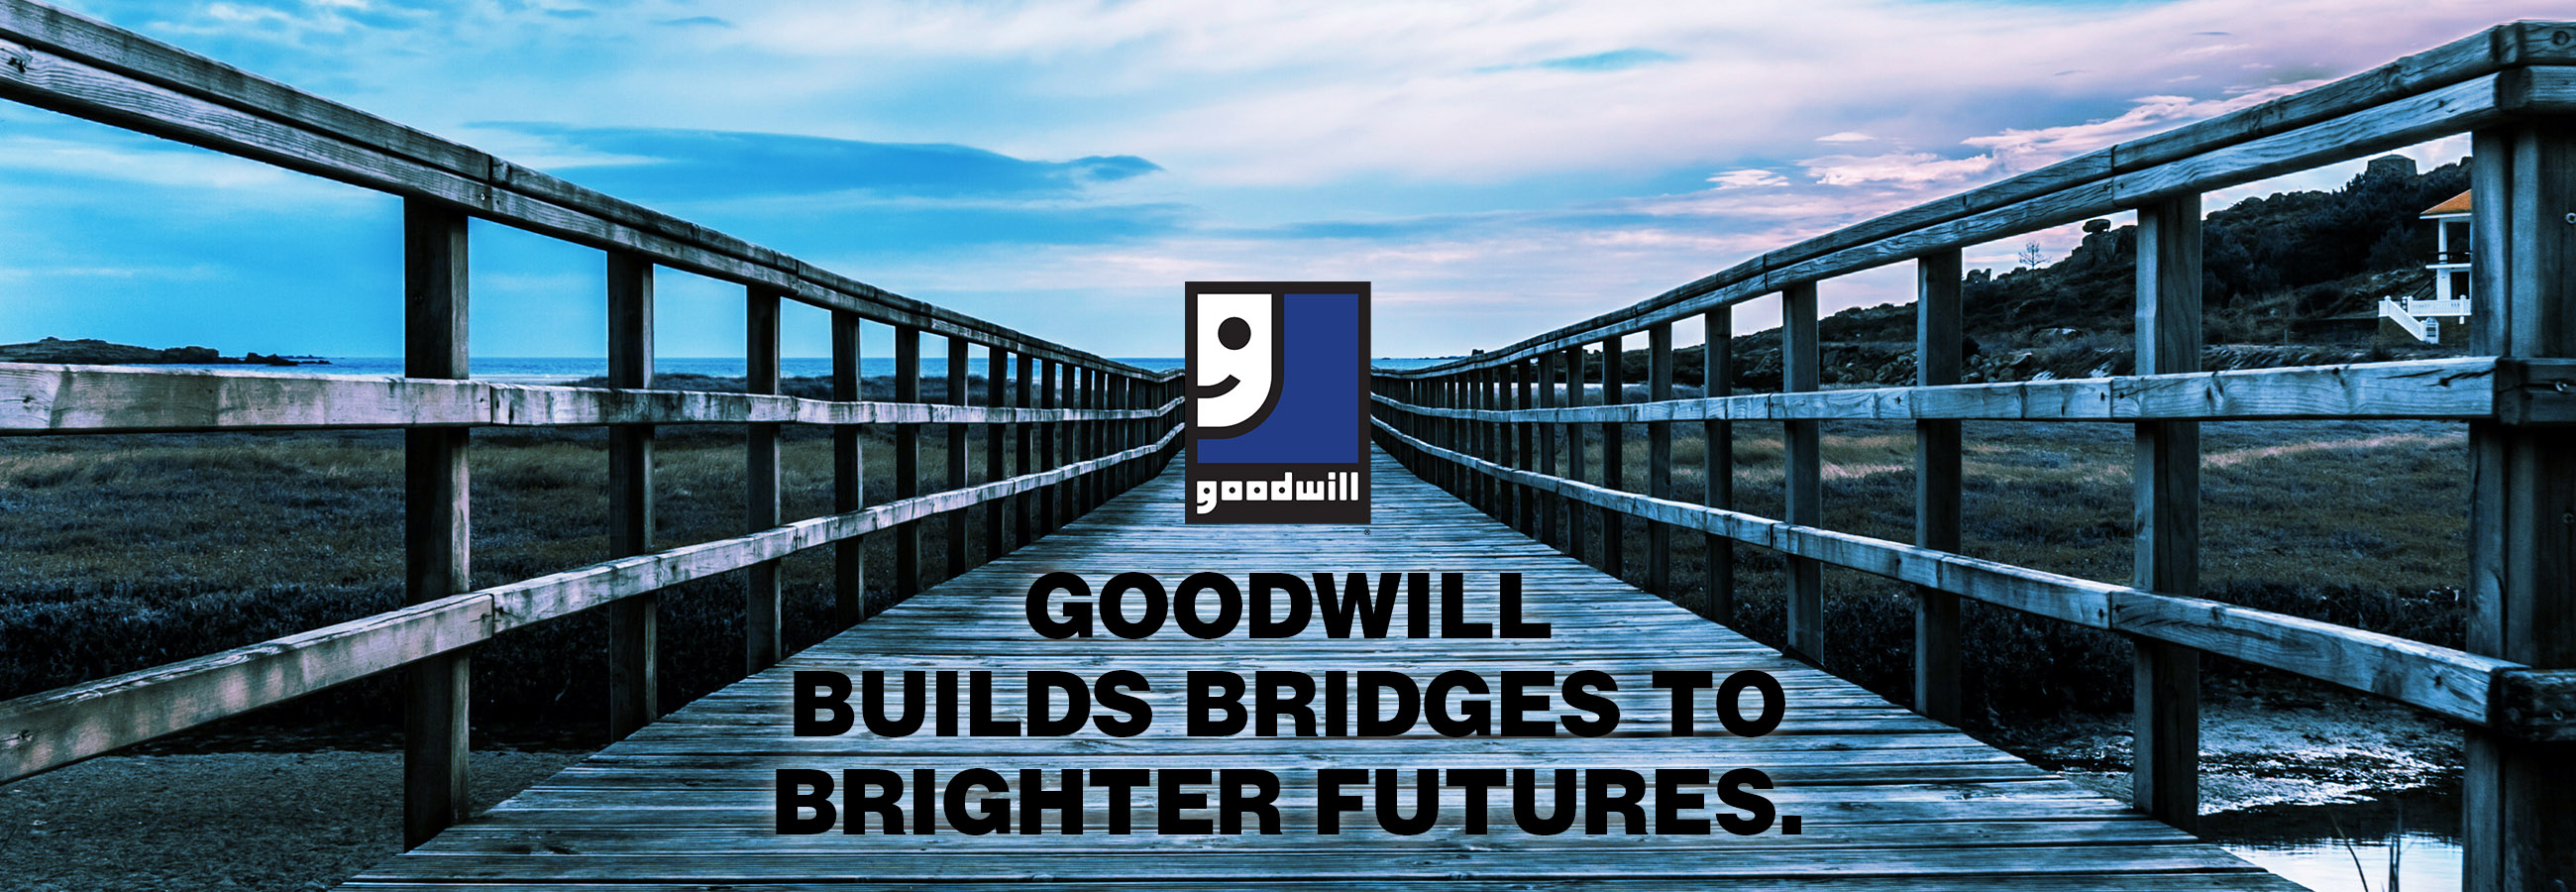 Goodwill builds bridges to brighter futures.